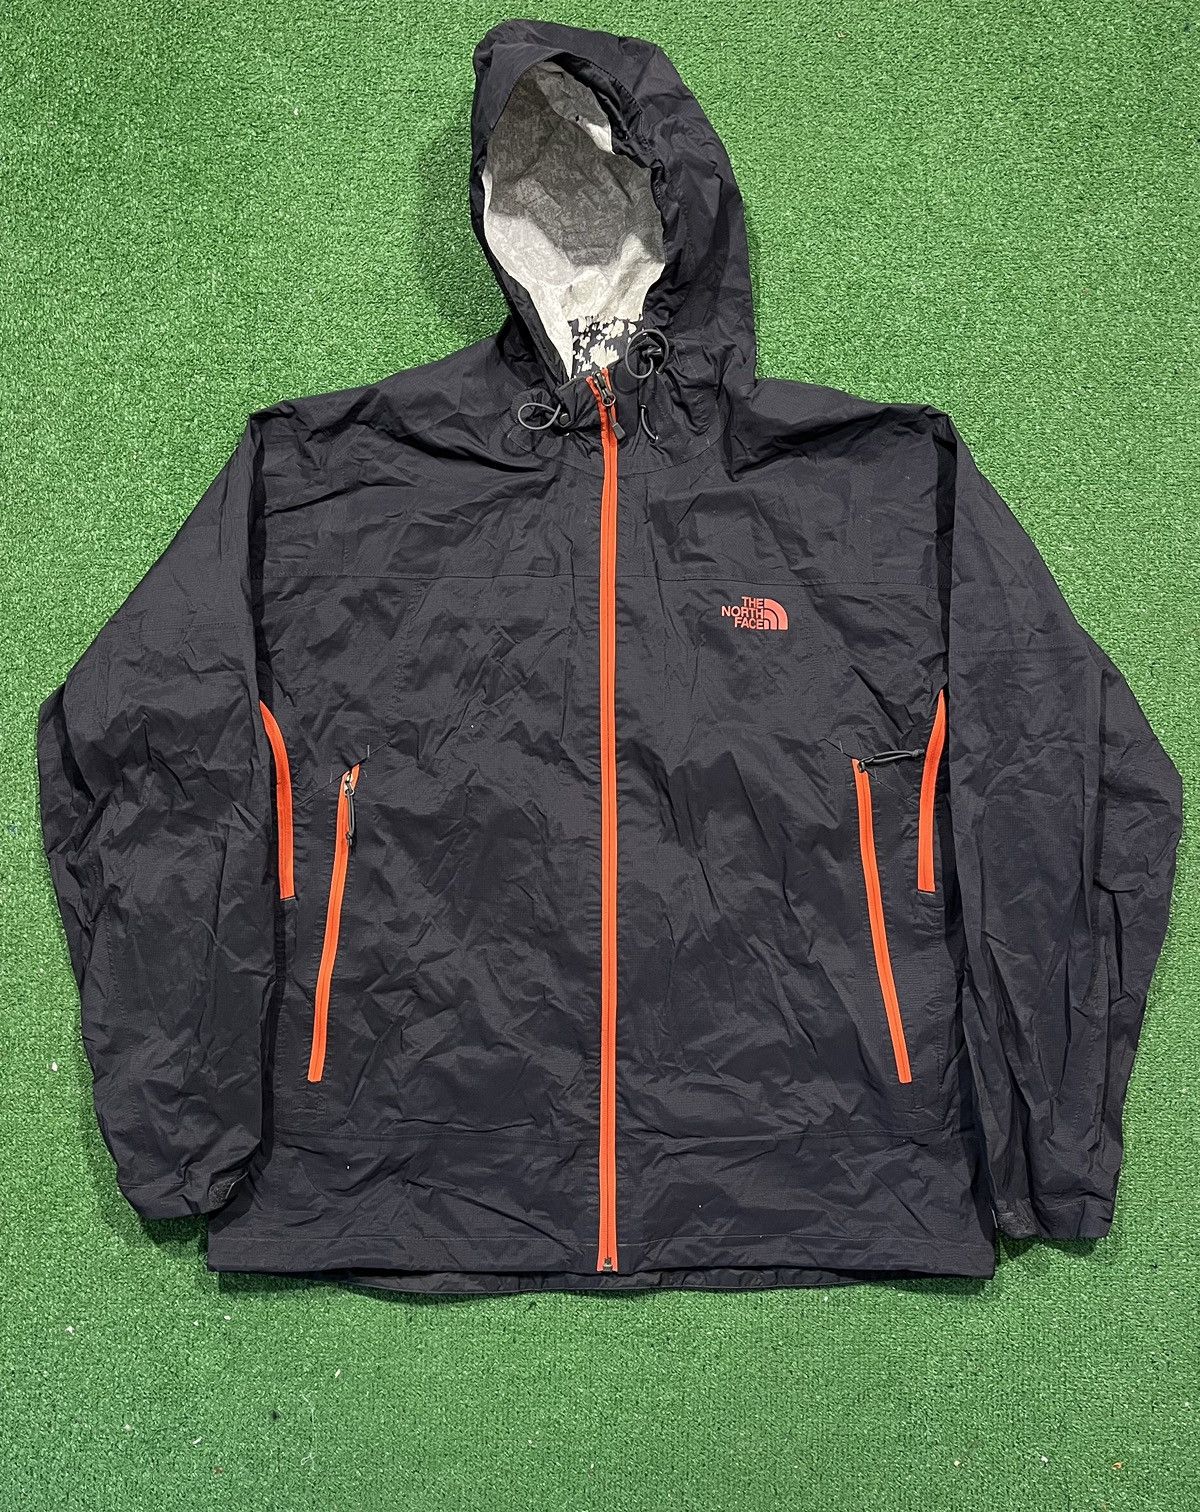 The North Face The North Face Hyvent Jacket | Grailed